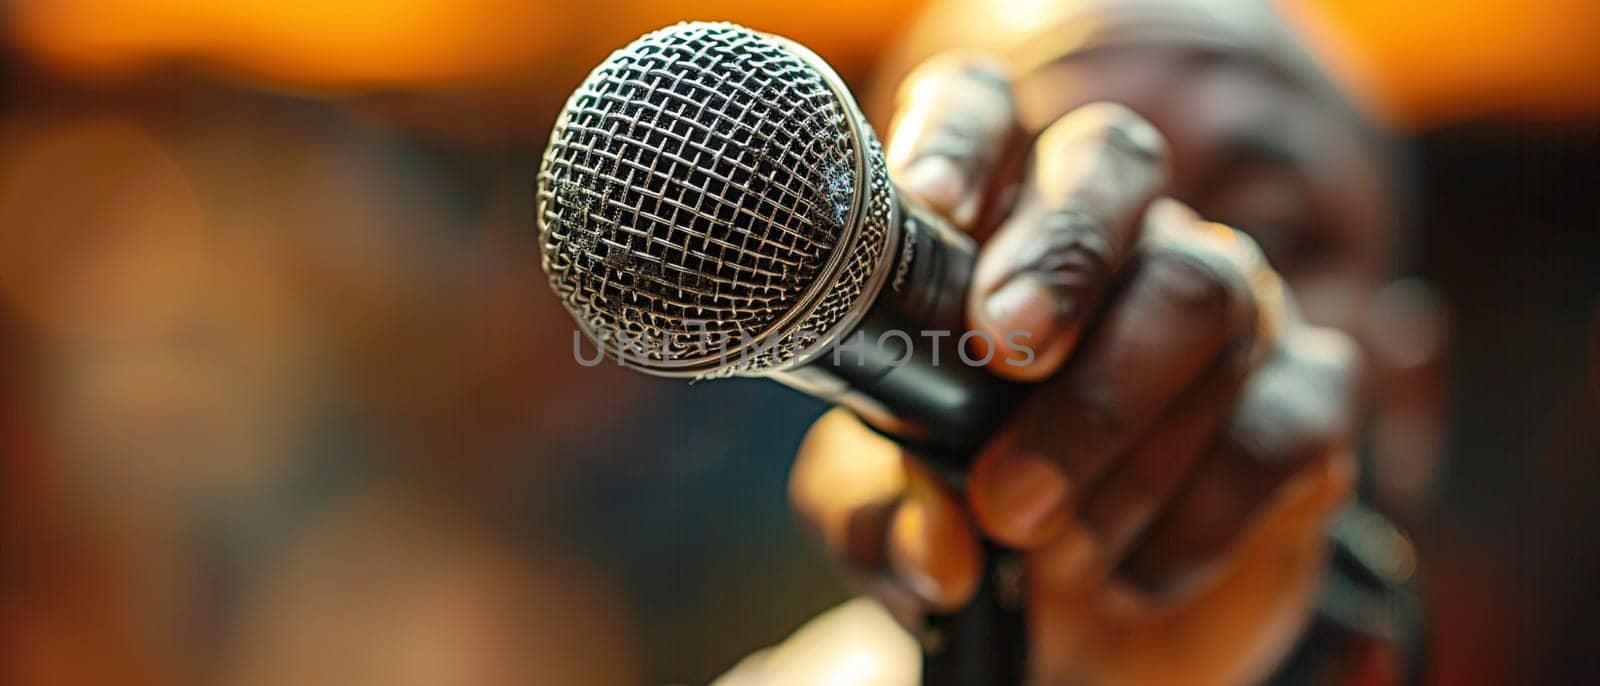 Hand holding a microphone, capturing expression, communication, and performance.